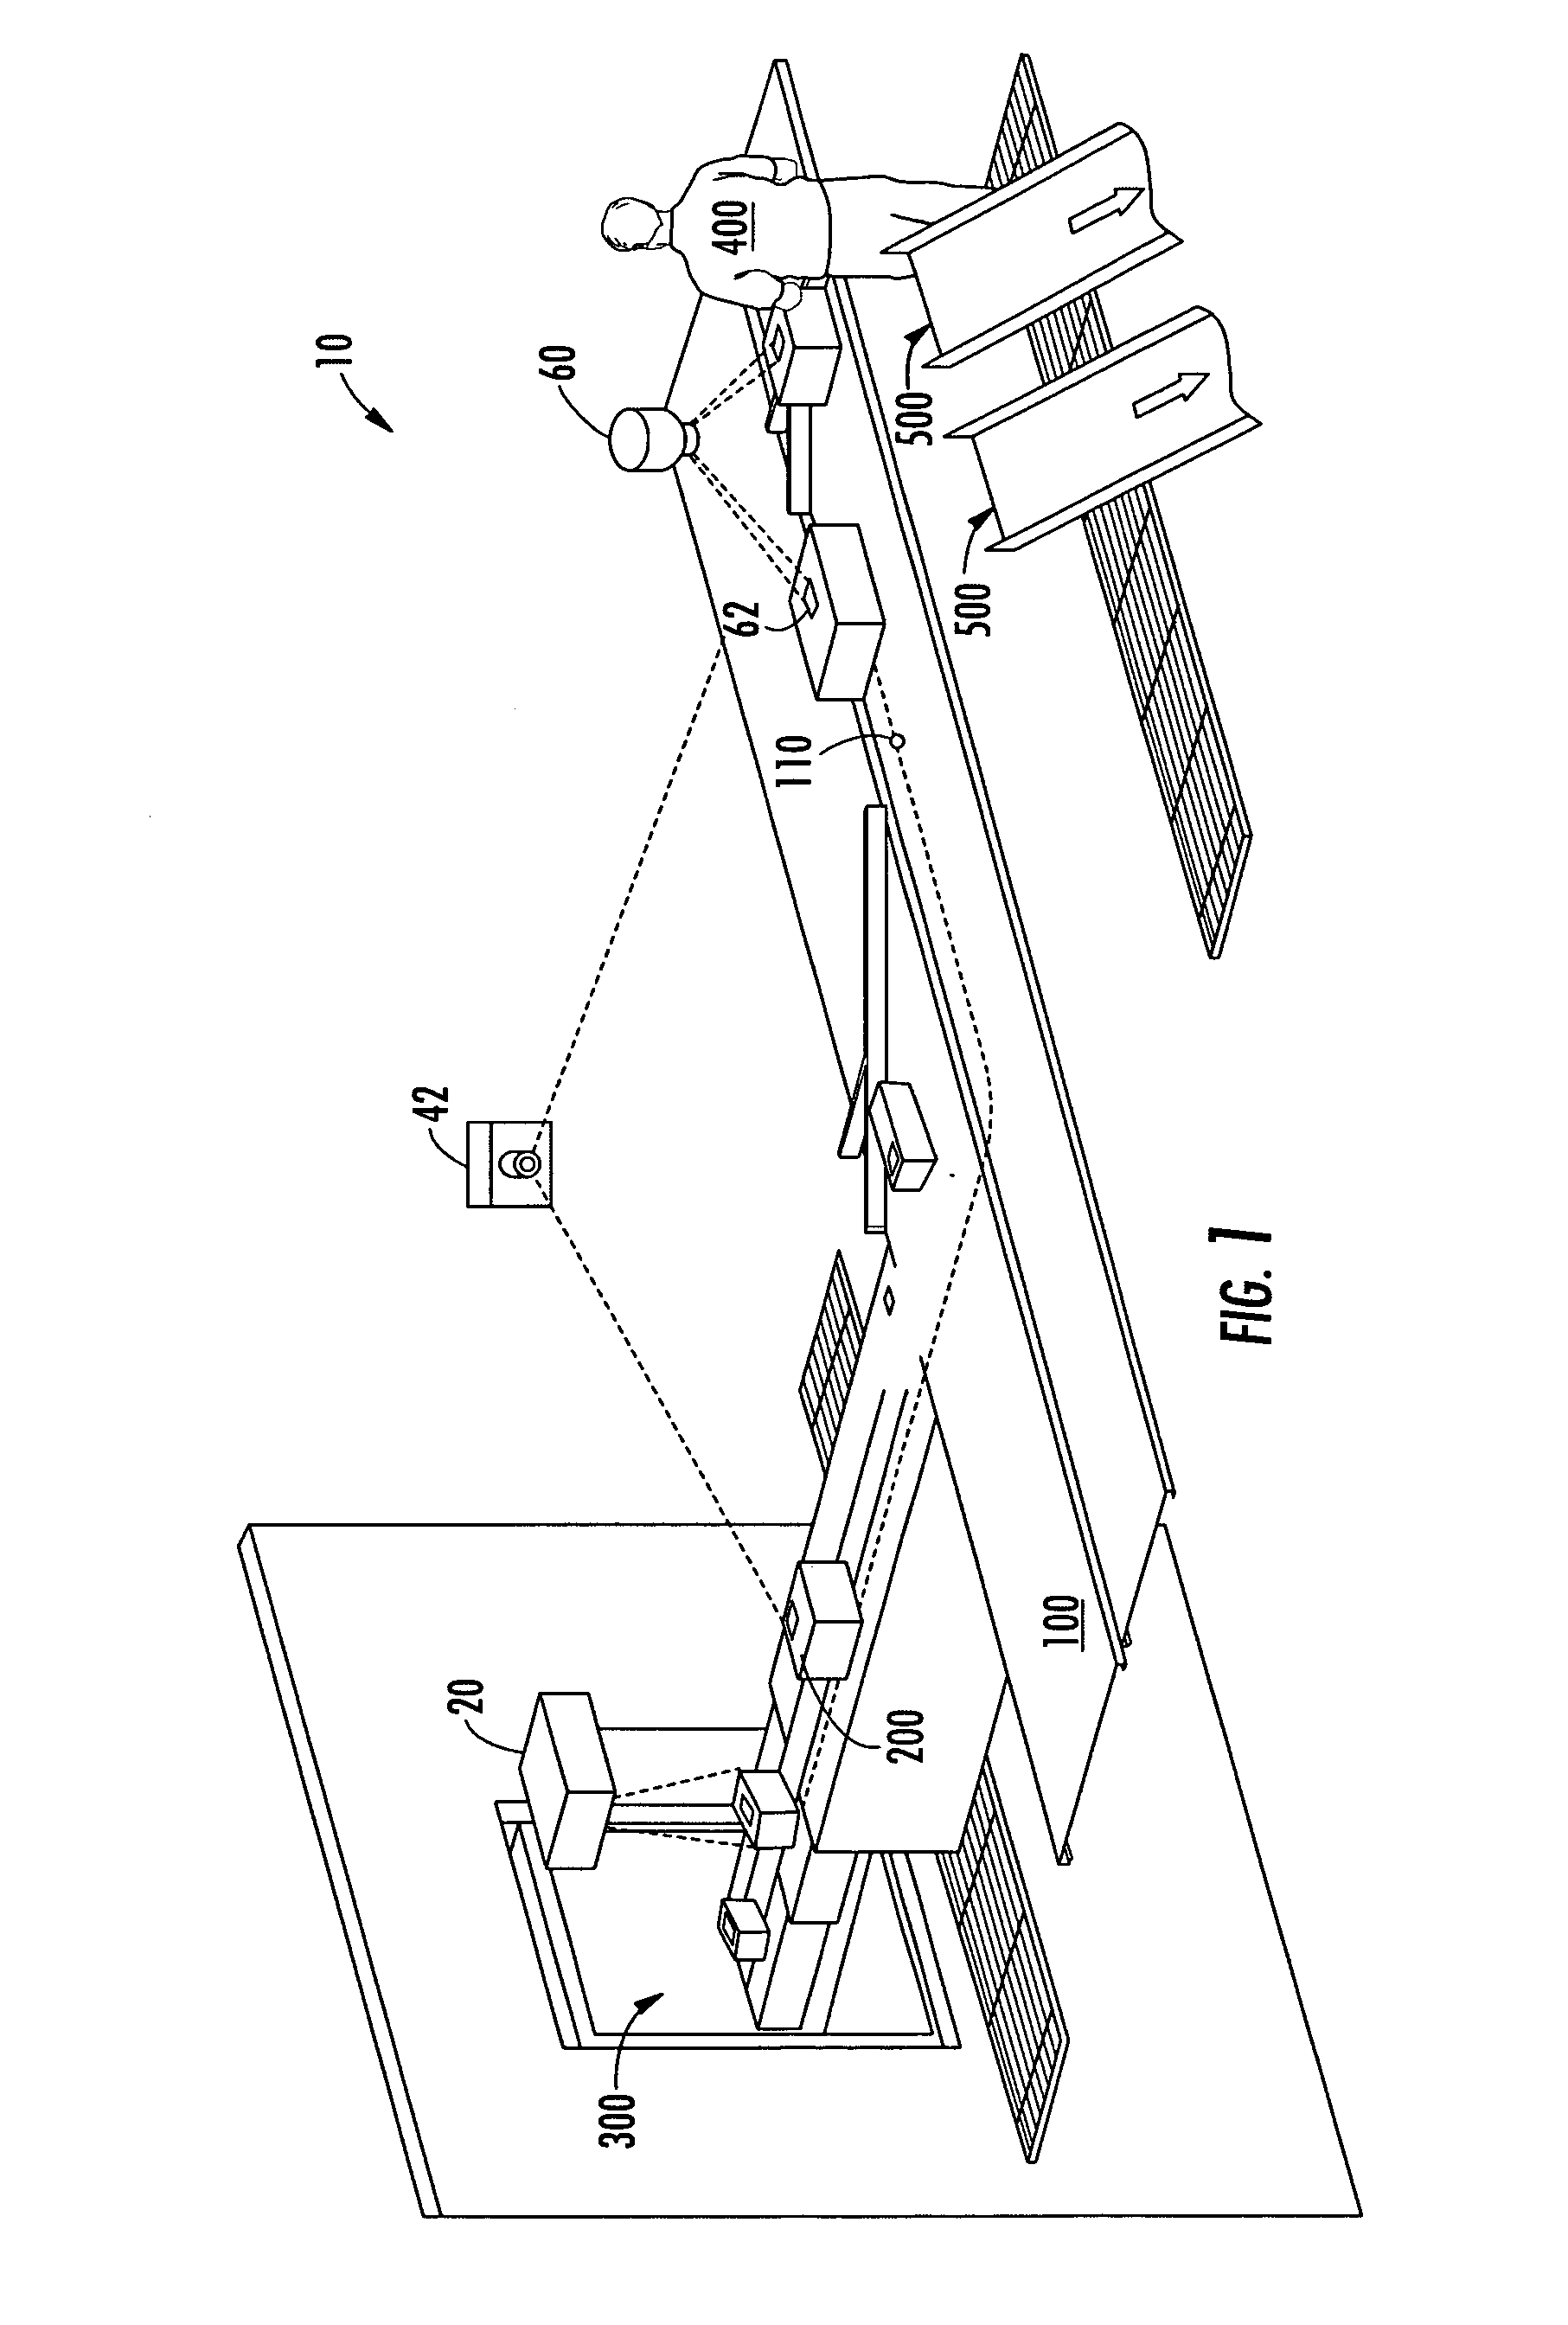 System for projecting a handling instruction onto a moving item or parcel